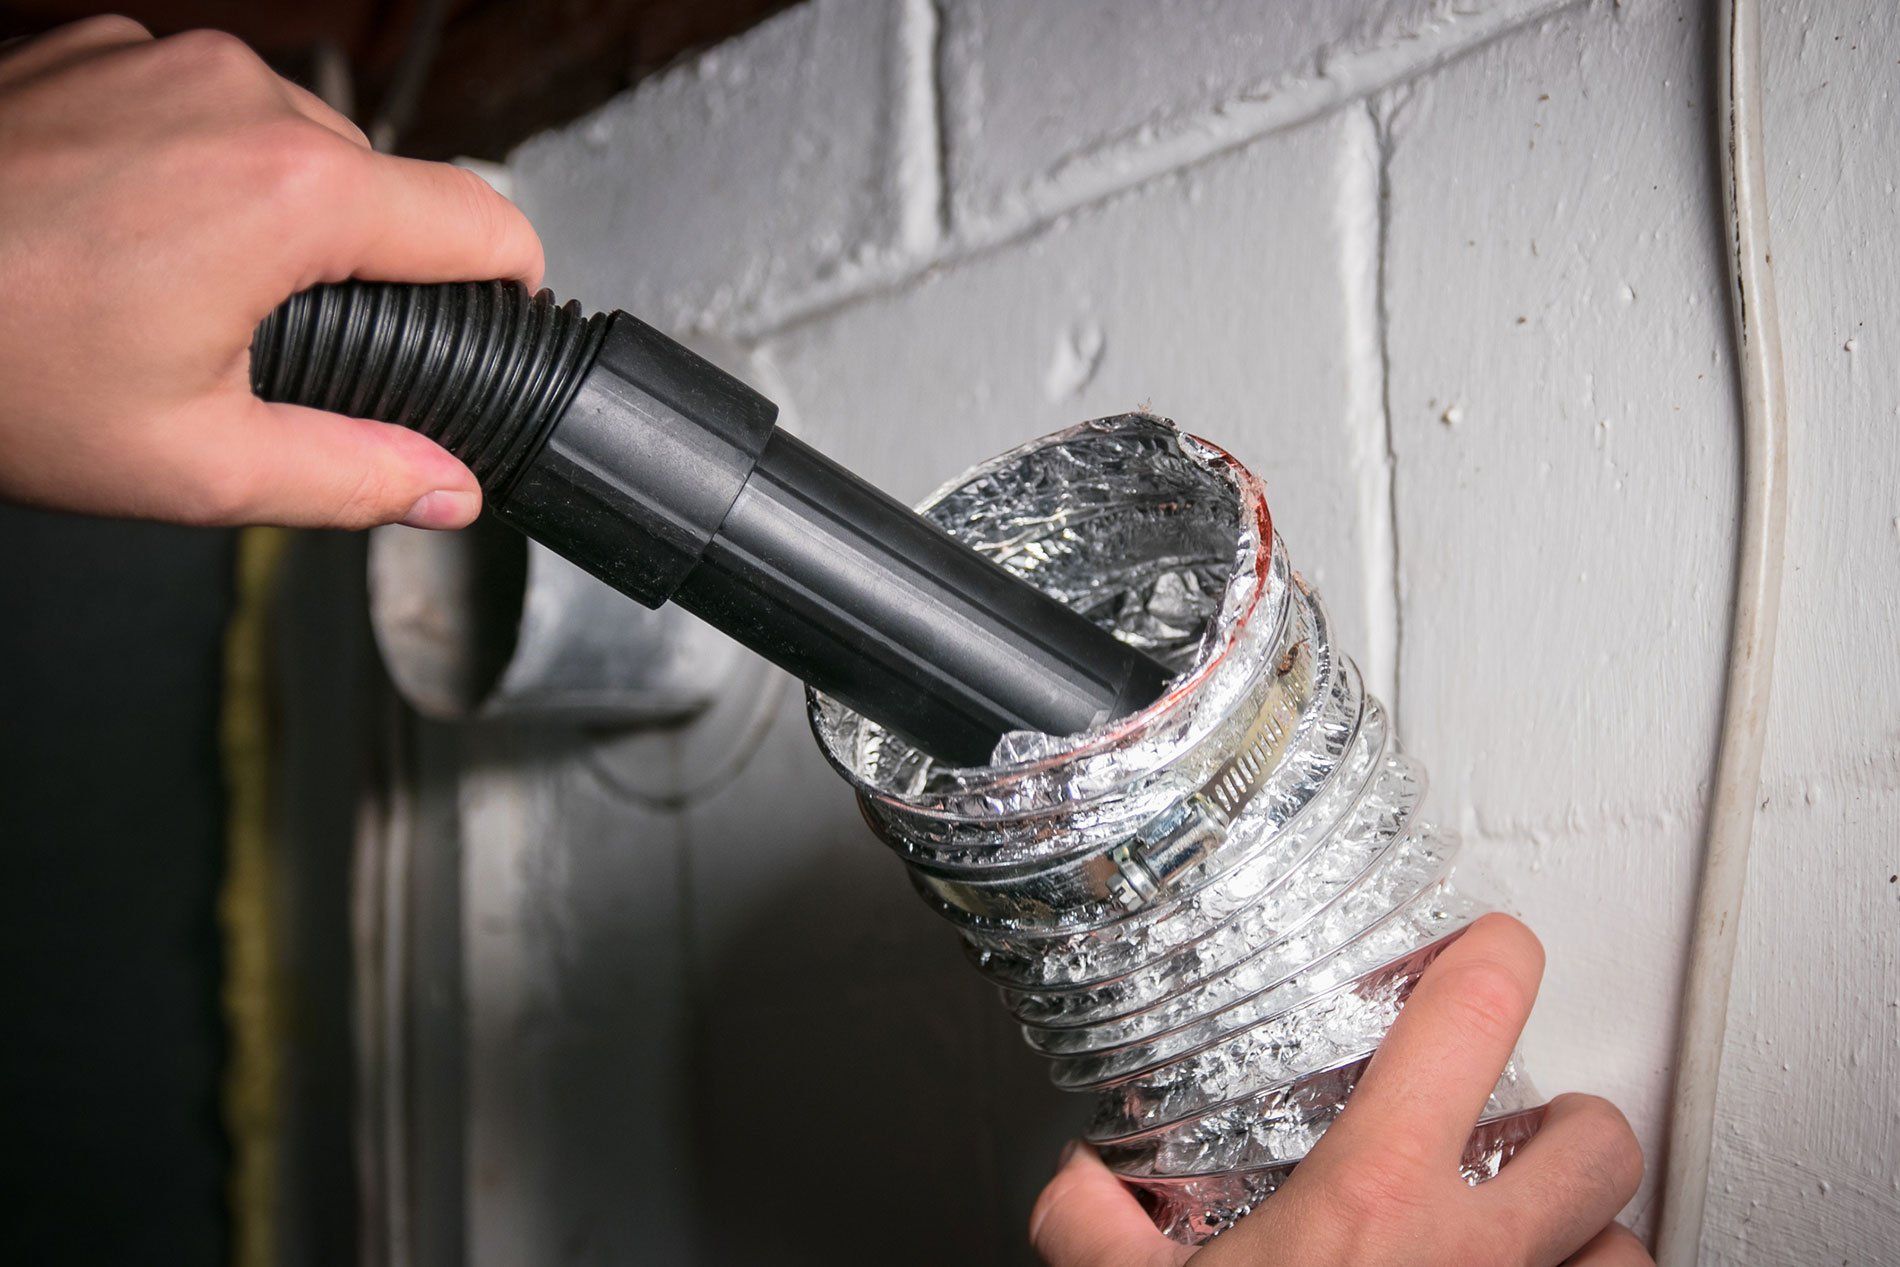 Dryer vent cleaning services